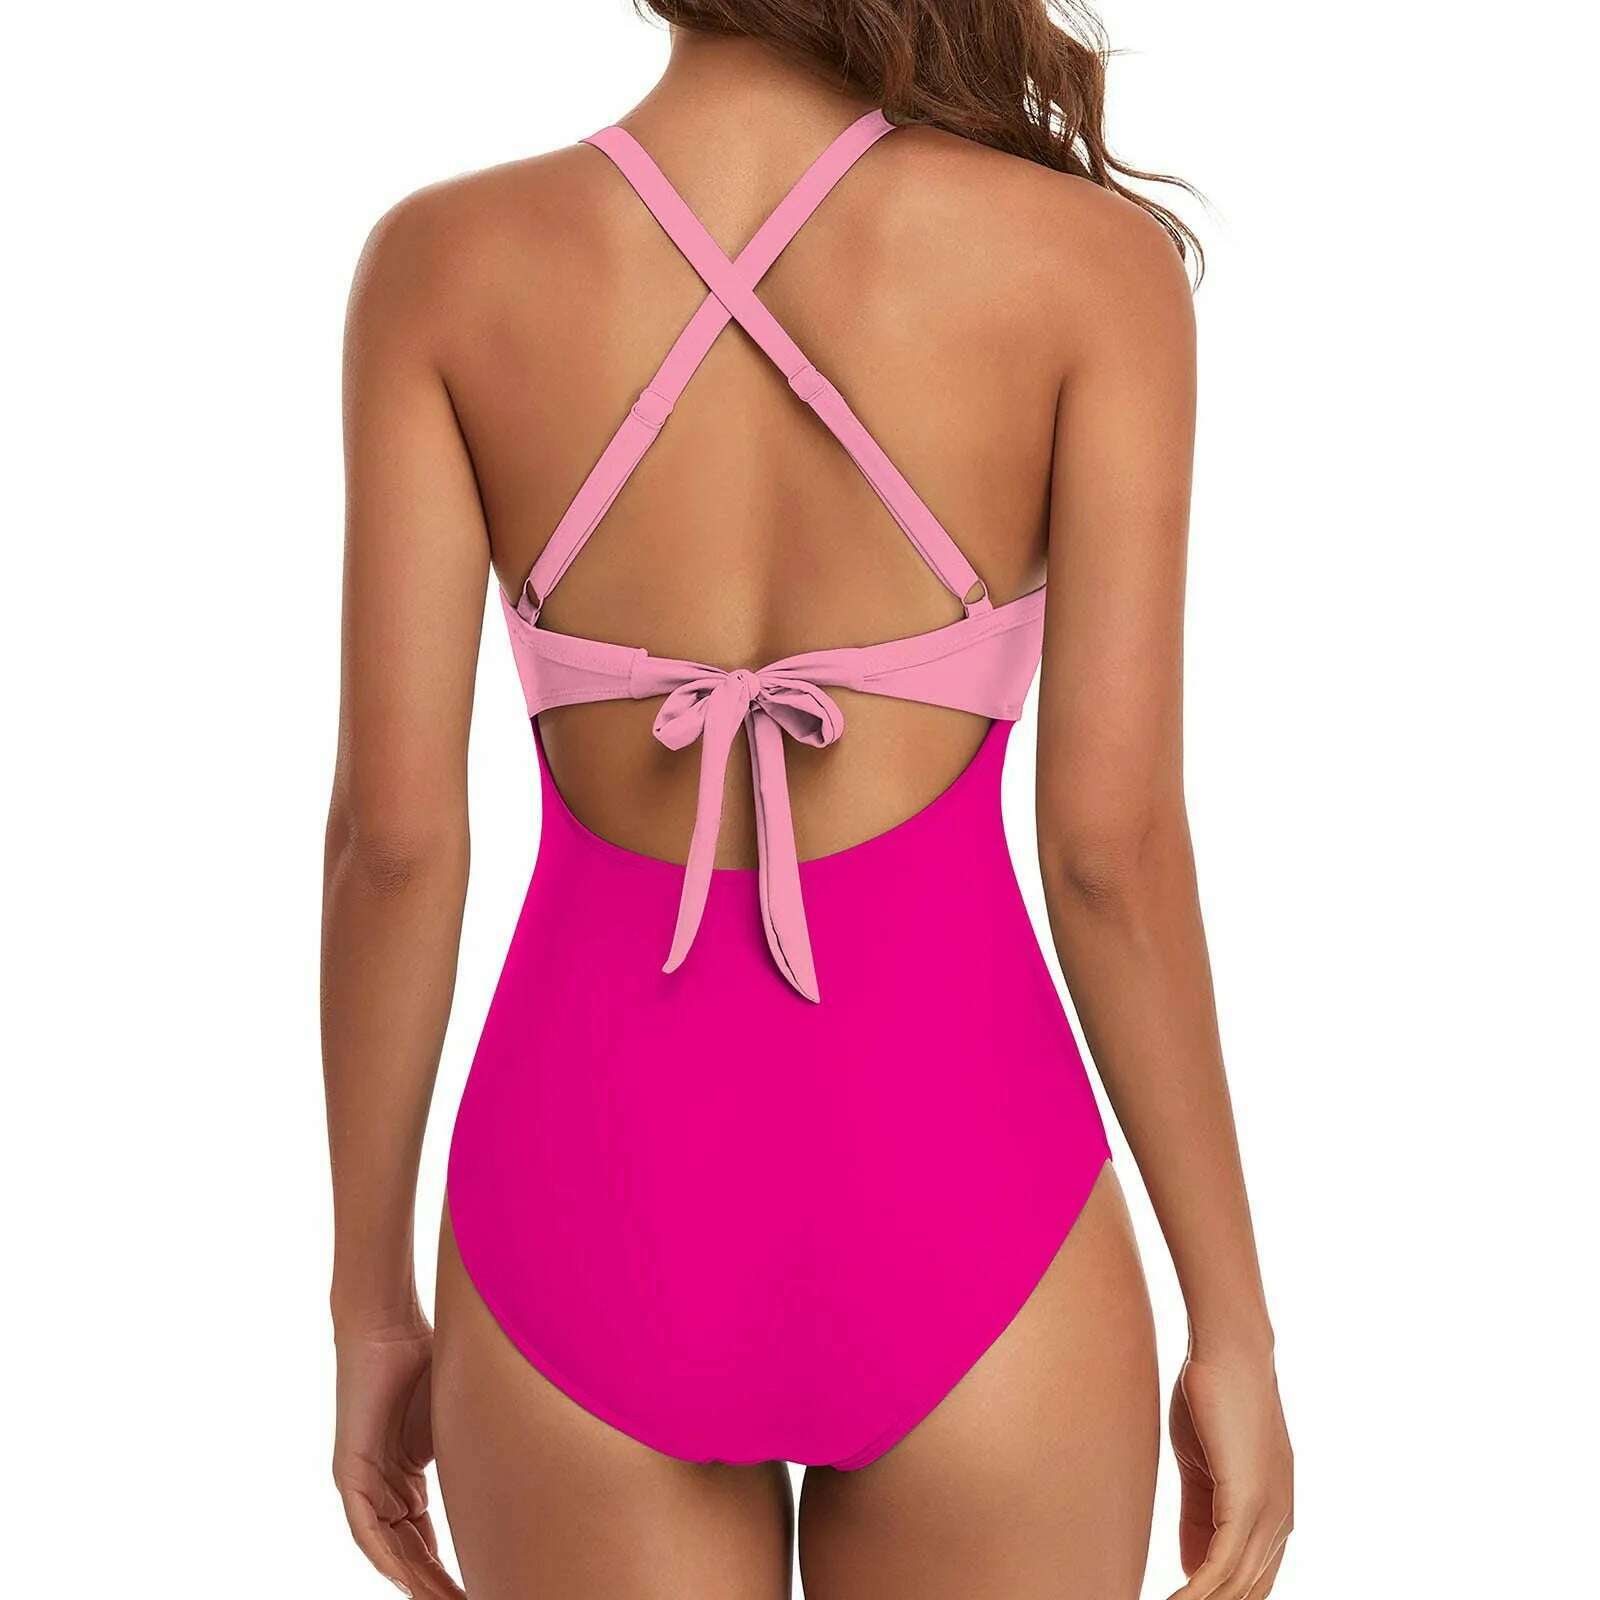 KIMLUD, Women's Colorful Sexy Hollow Cross Halter Bikini Beach Swimsuit (With Chest Pad Without Steel Bra), KIMLUD Women's Clothes